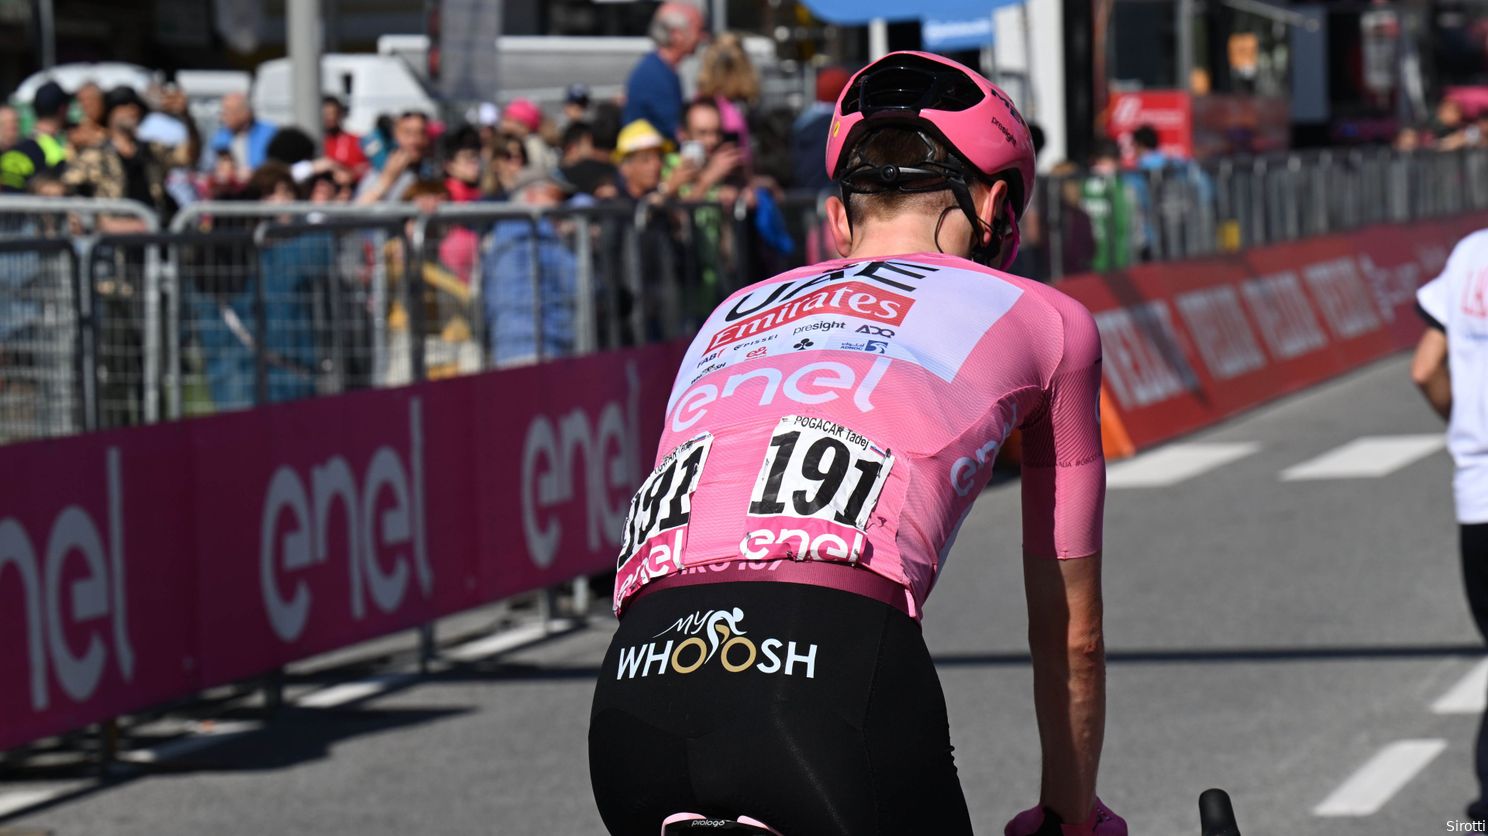 uci threatened pogacar and uae with disqualification over pink-purple rcs suit, so pogi switched to black in giro